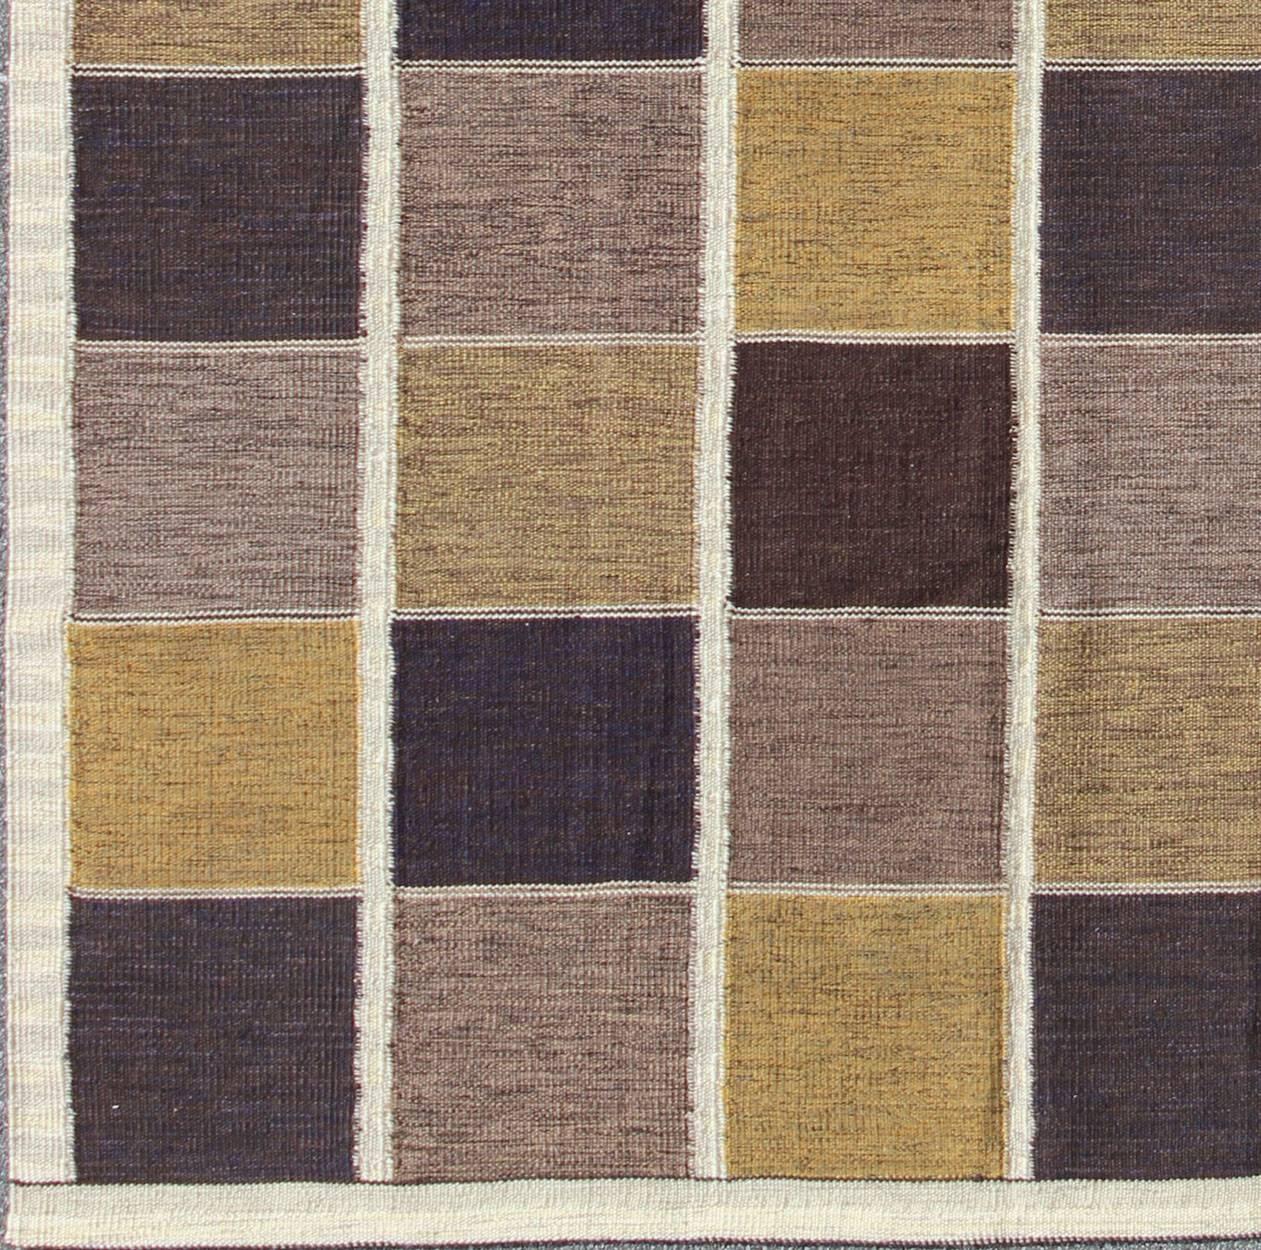 Large Contemporary Scandinavian Swedish Design flat weave rug with Modern Design. Keivan Woven Arts rug # RJK-14224-SHB-020-05. Scandinavian flat weave. 
Measures: 8'6 x 11'11.
This Scandinavian/Swedish flat-weave is inspired by the work of